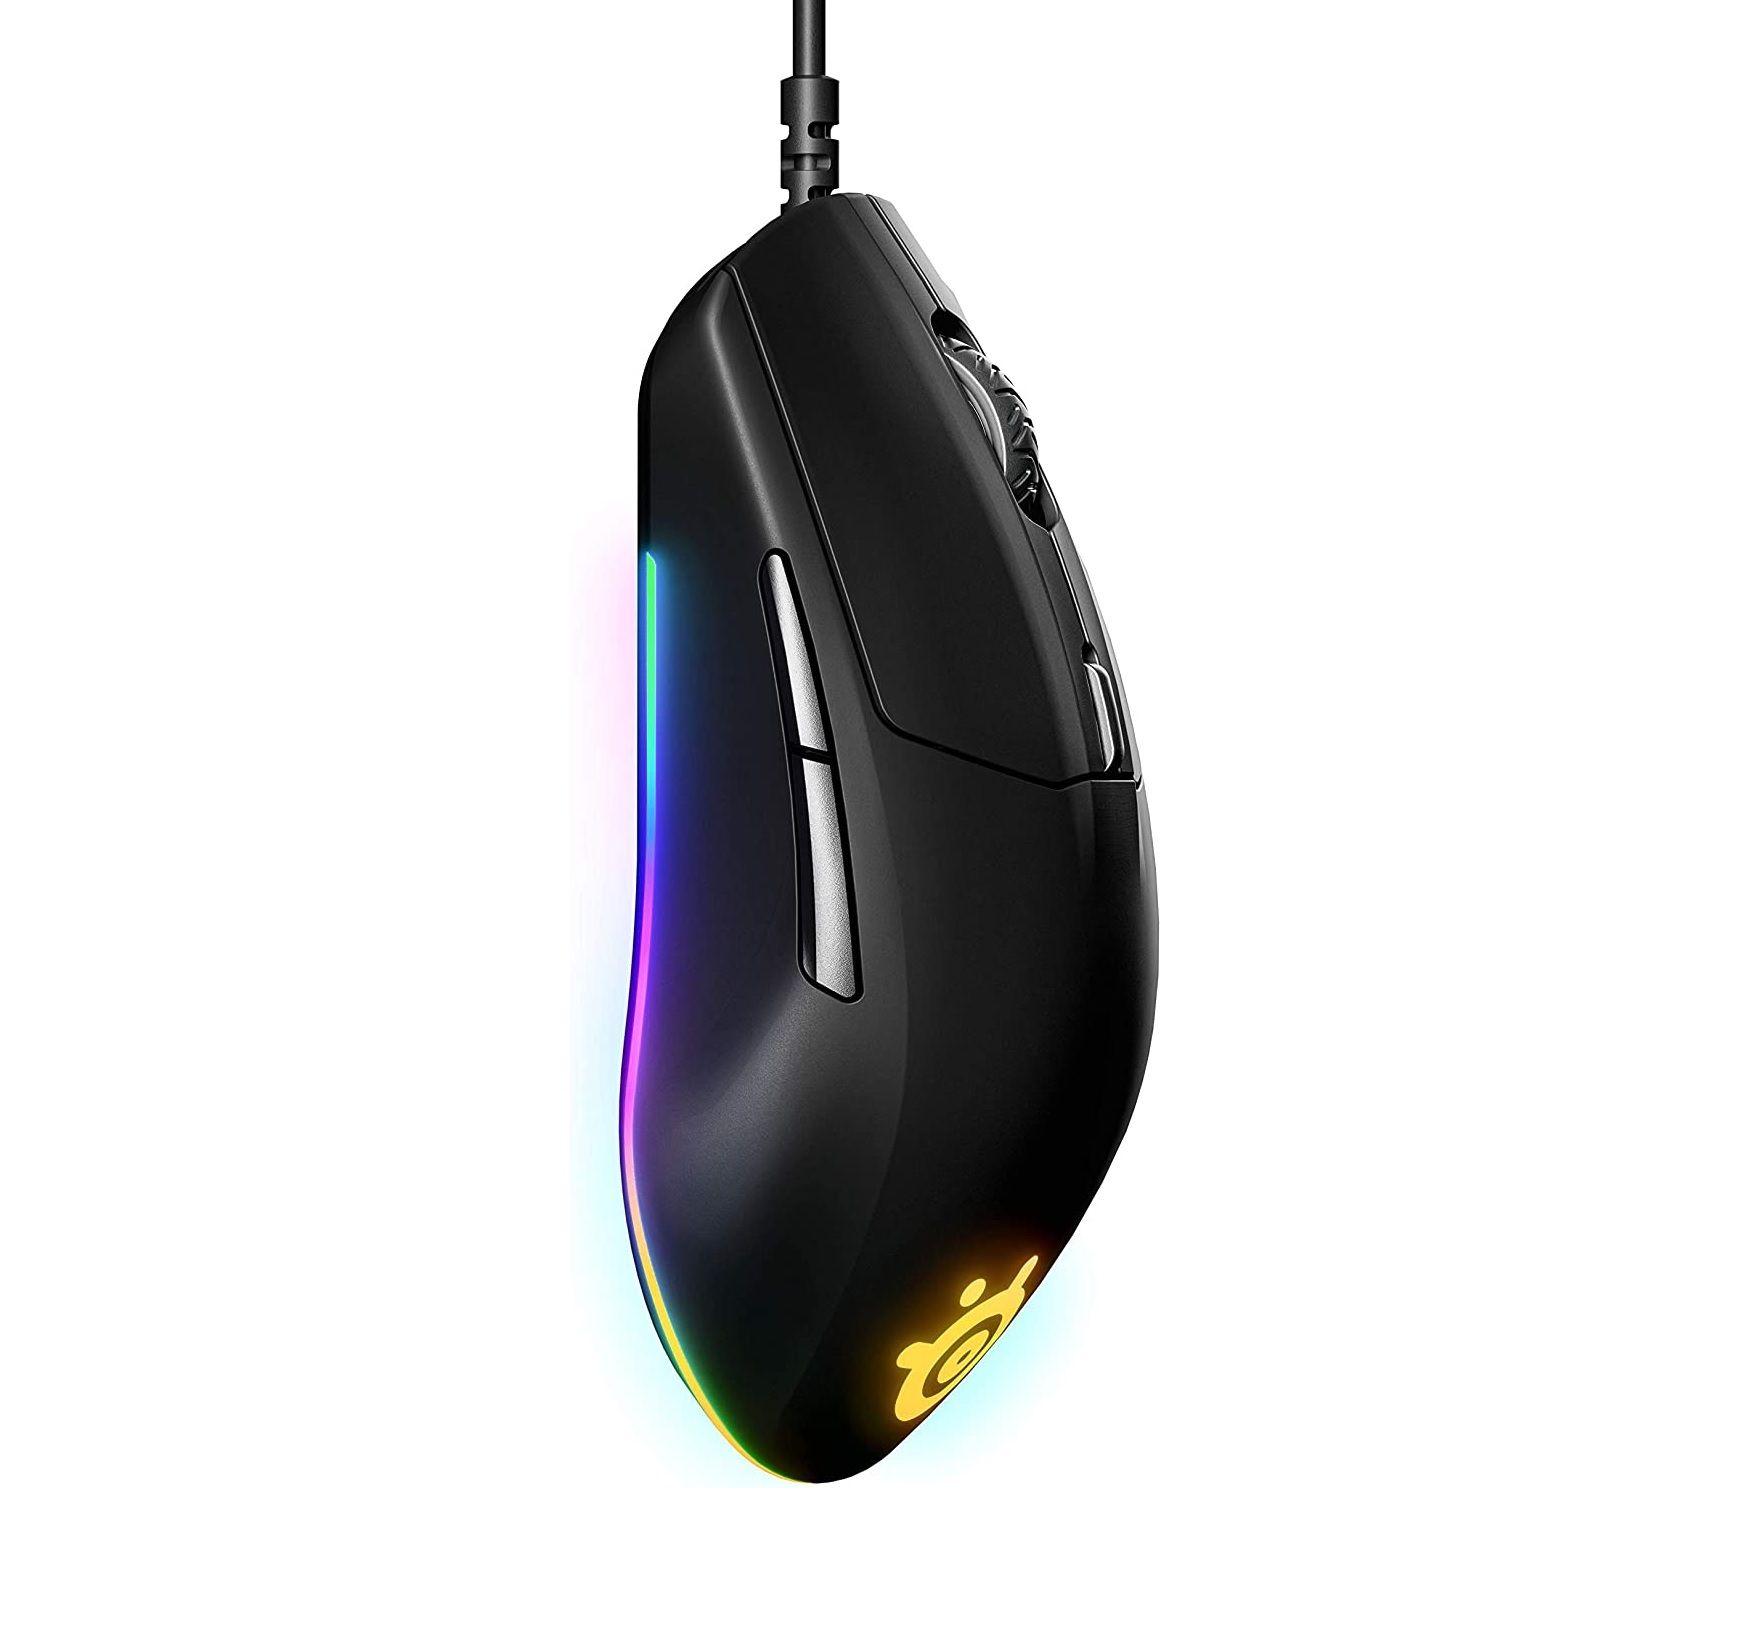 the wired model of the steelseries rival 3 gaming mouse